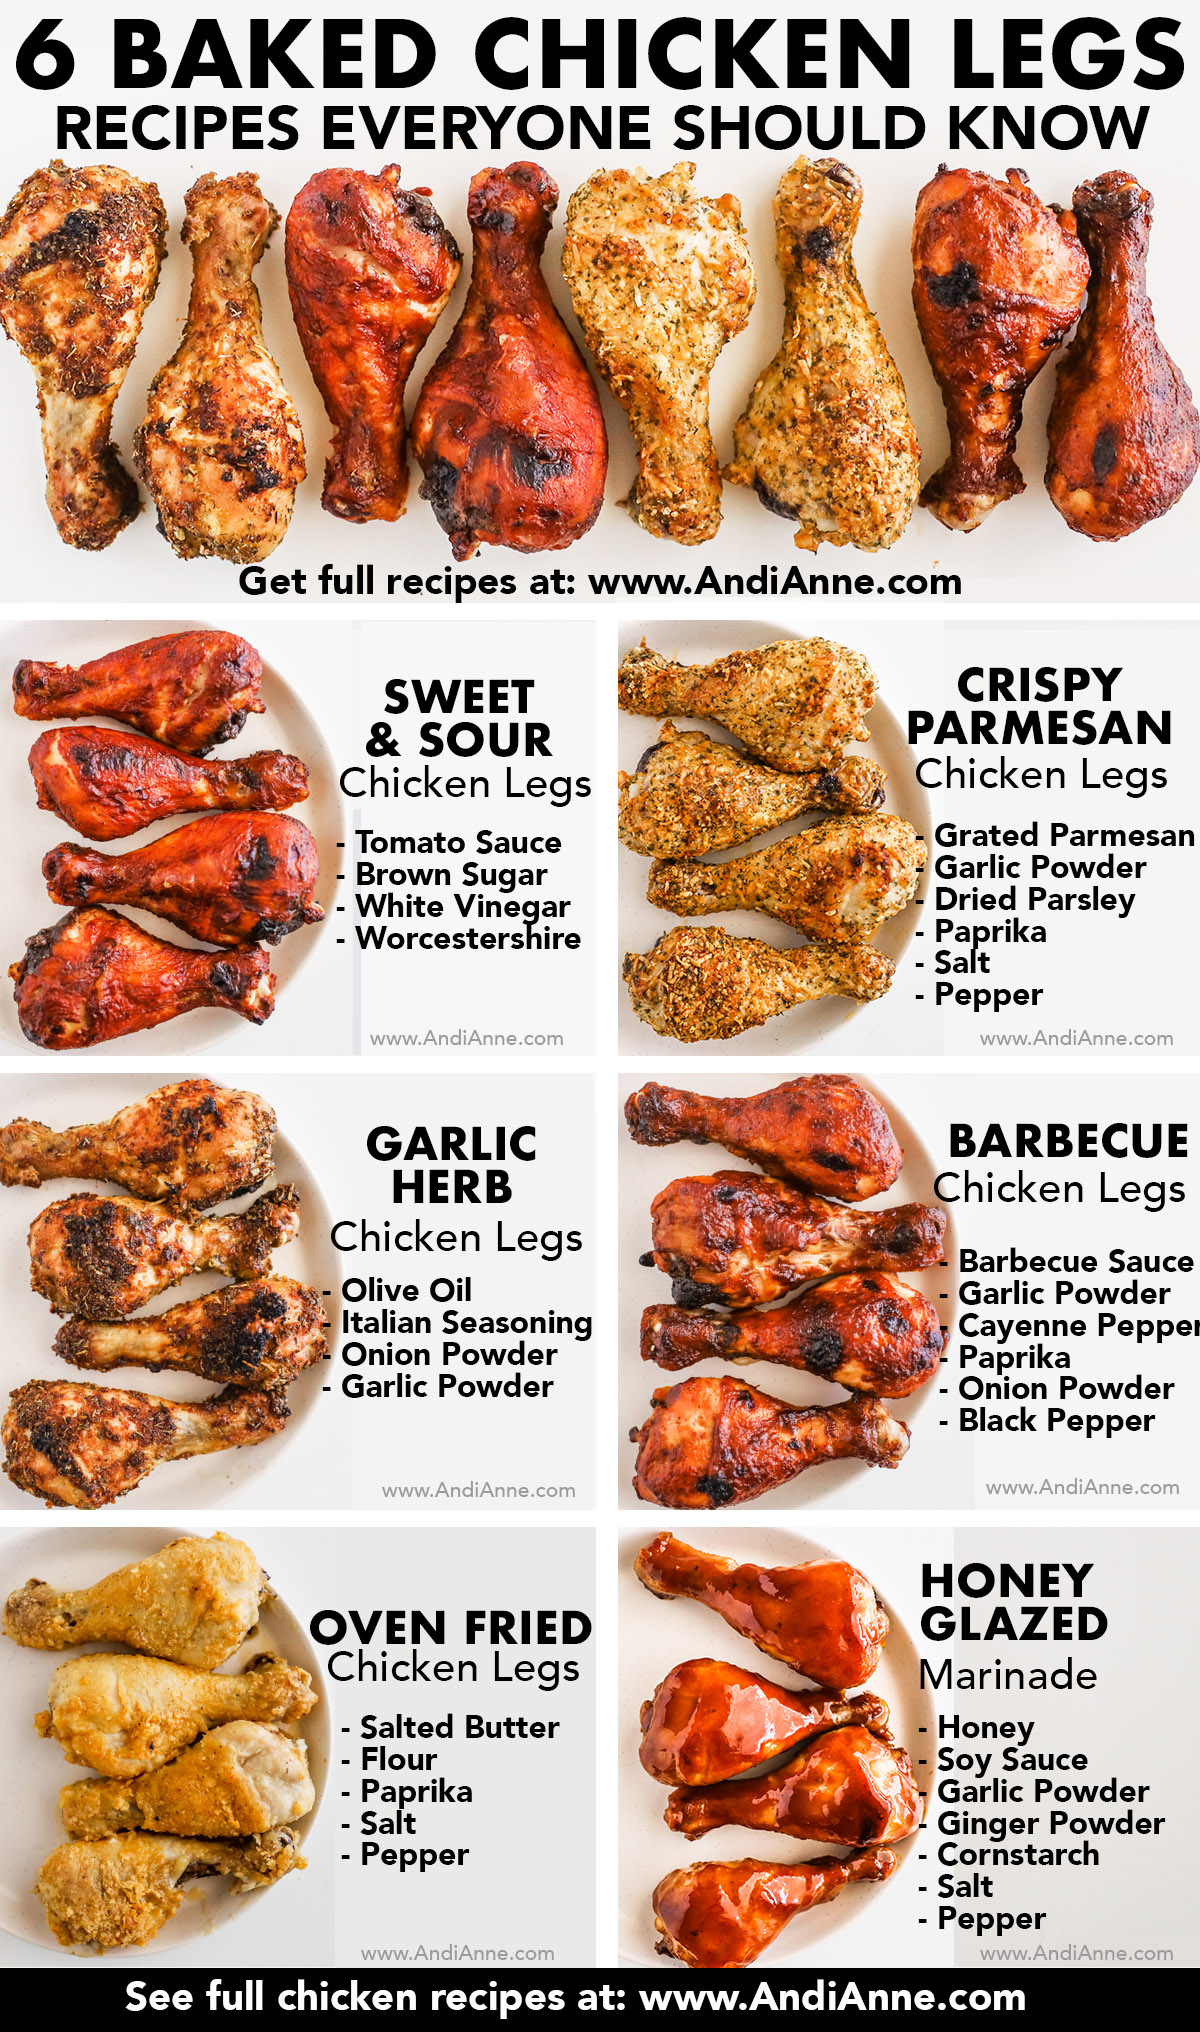 Images of six baked chicken legs including sweet and sour, crispy parmesan, garlic herb, barbecue, oven fried and honey glazed, all with ingredients listed beside each image.